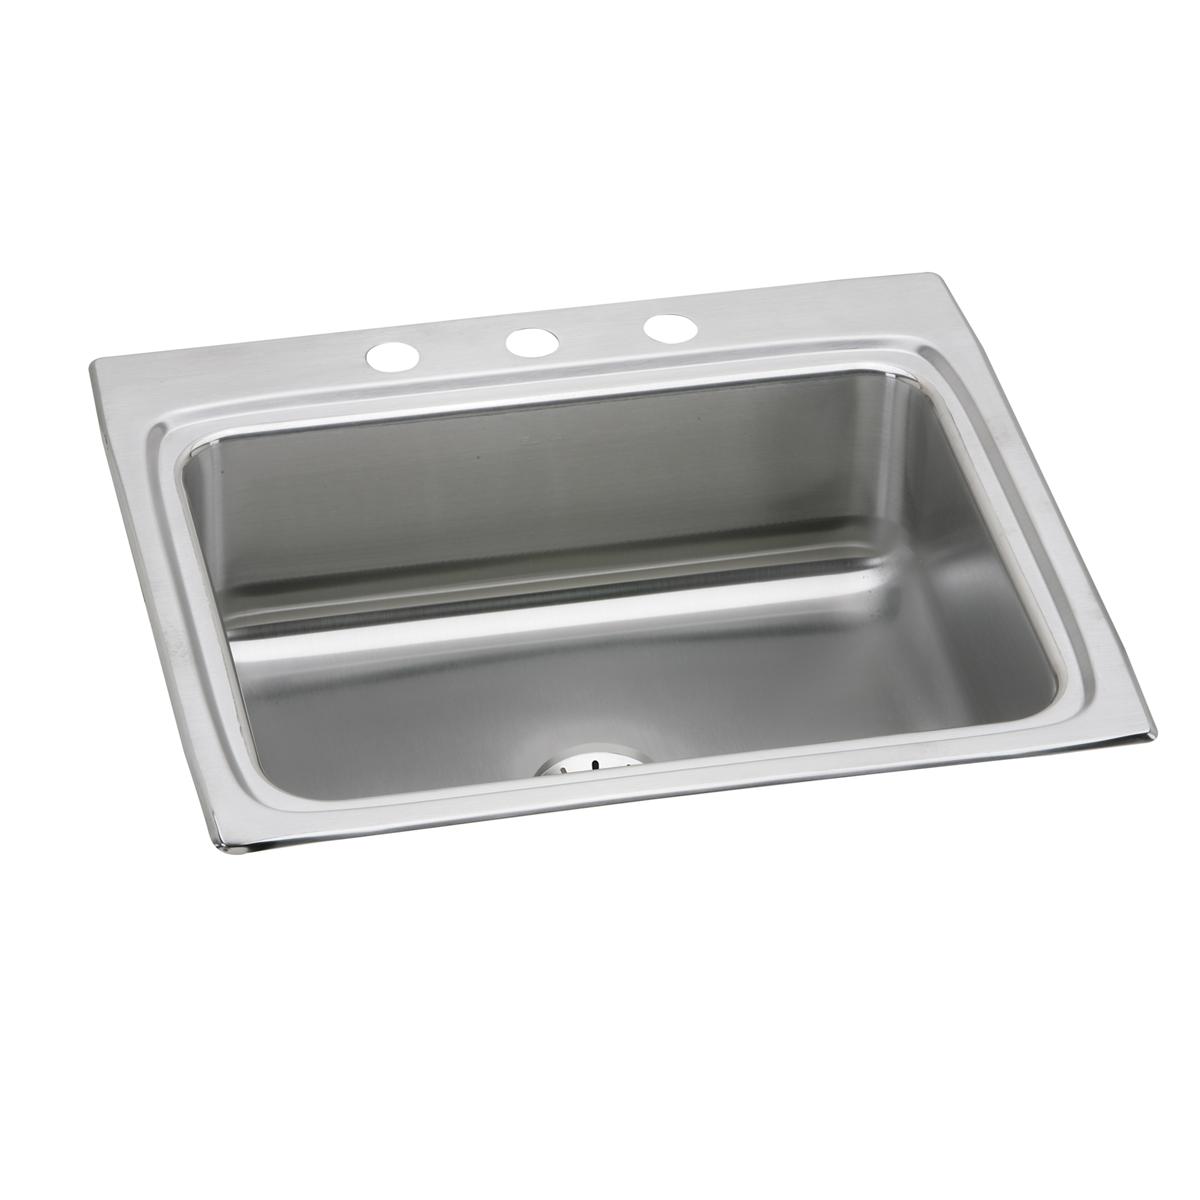 Elkay Lustertone Classic 25" x 22" x 8-1/8" Single Bowl Drop-in Sink with Perfect Drain